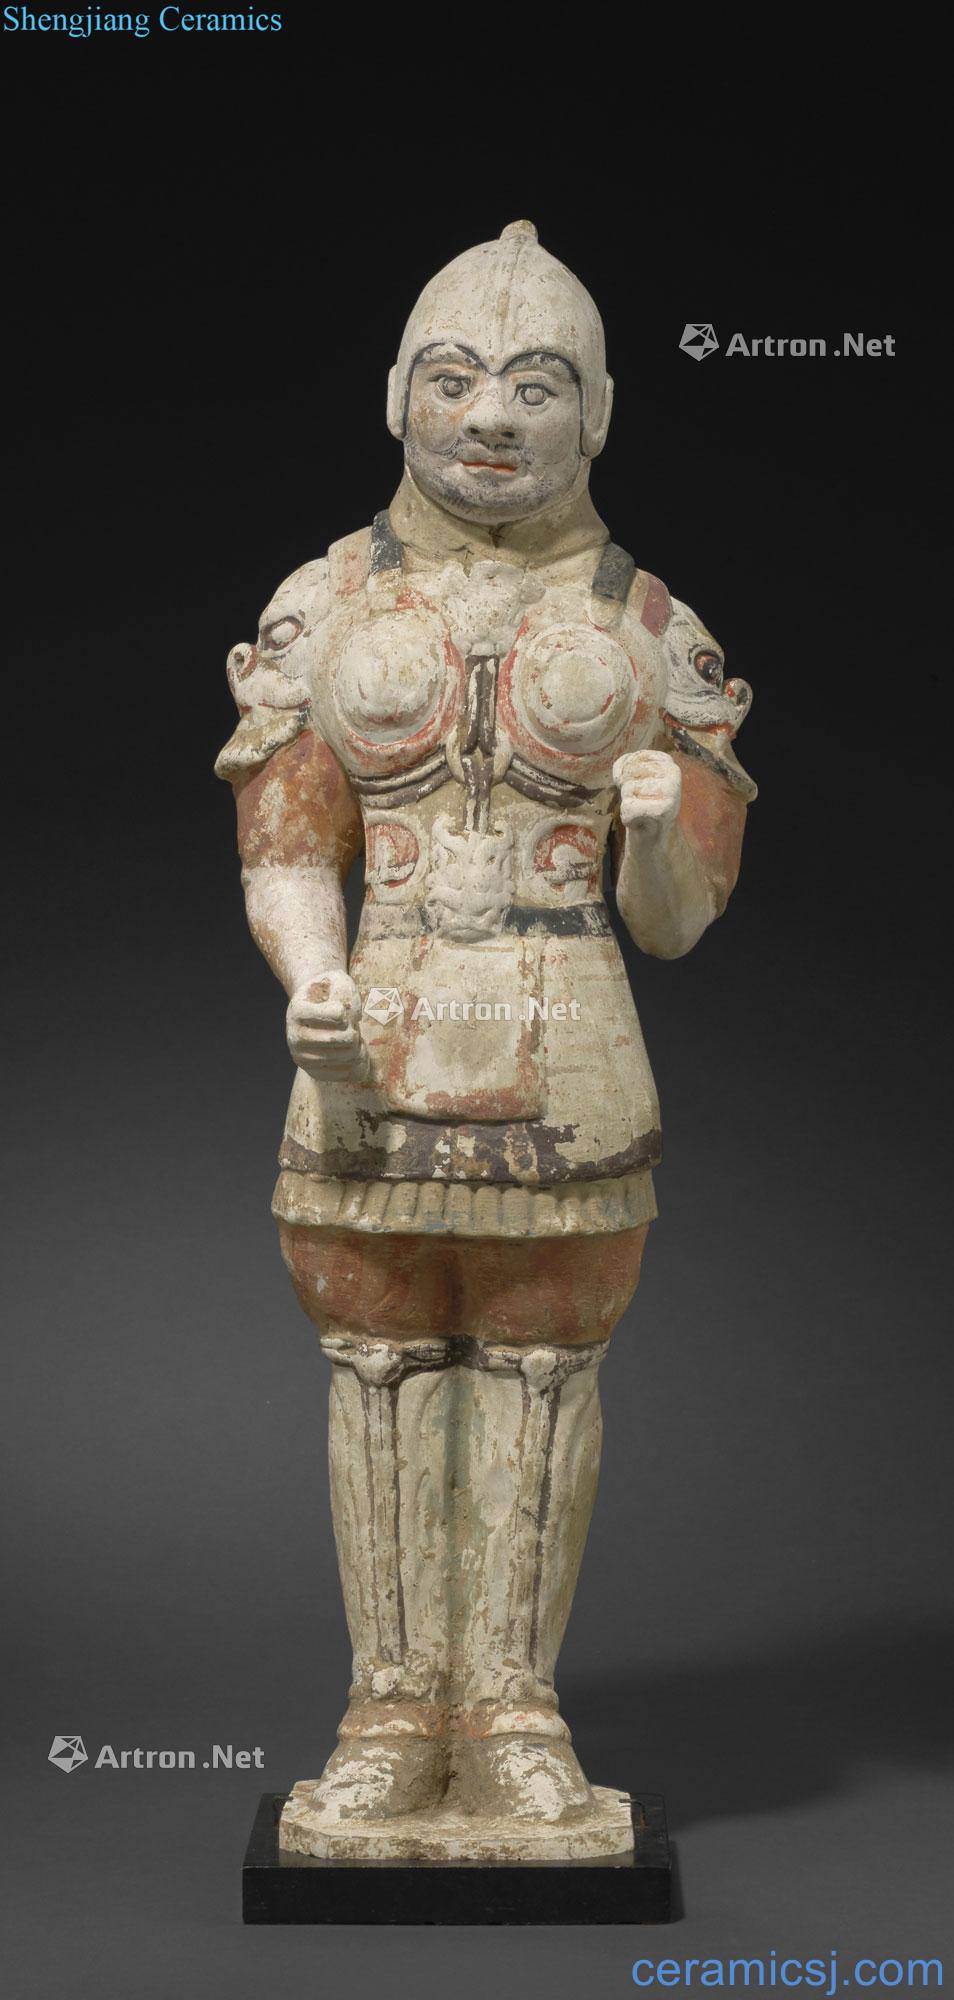 A made POTTERY TOMB FIGURE OF A WARRIOR